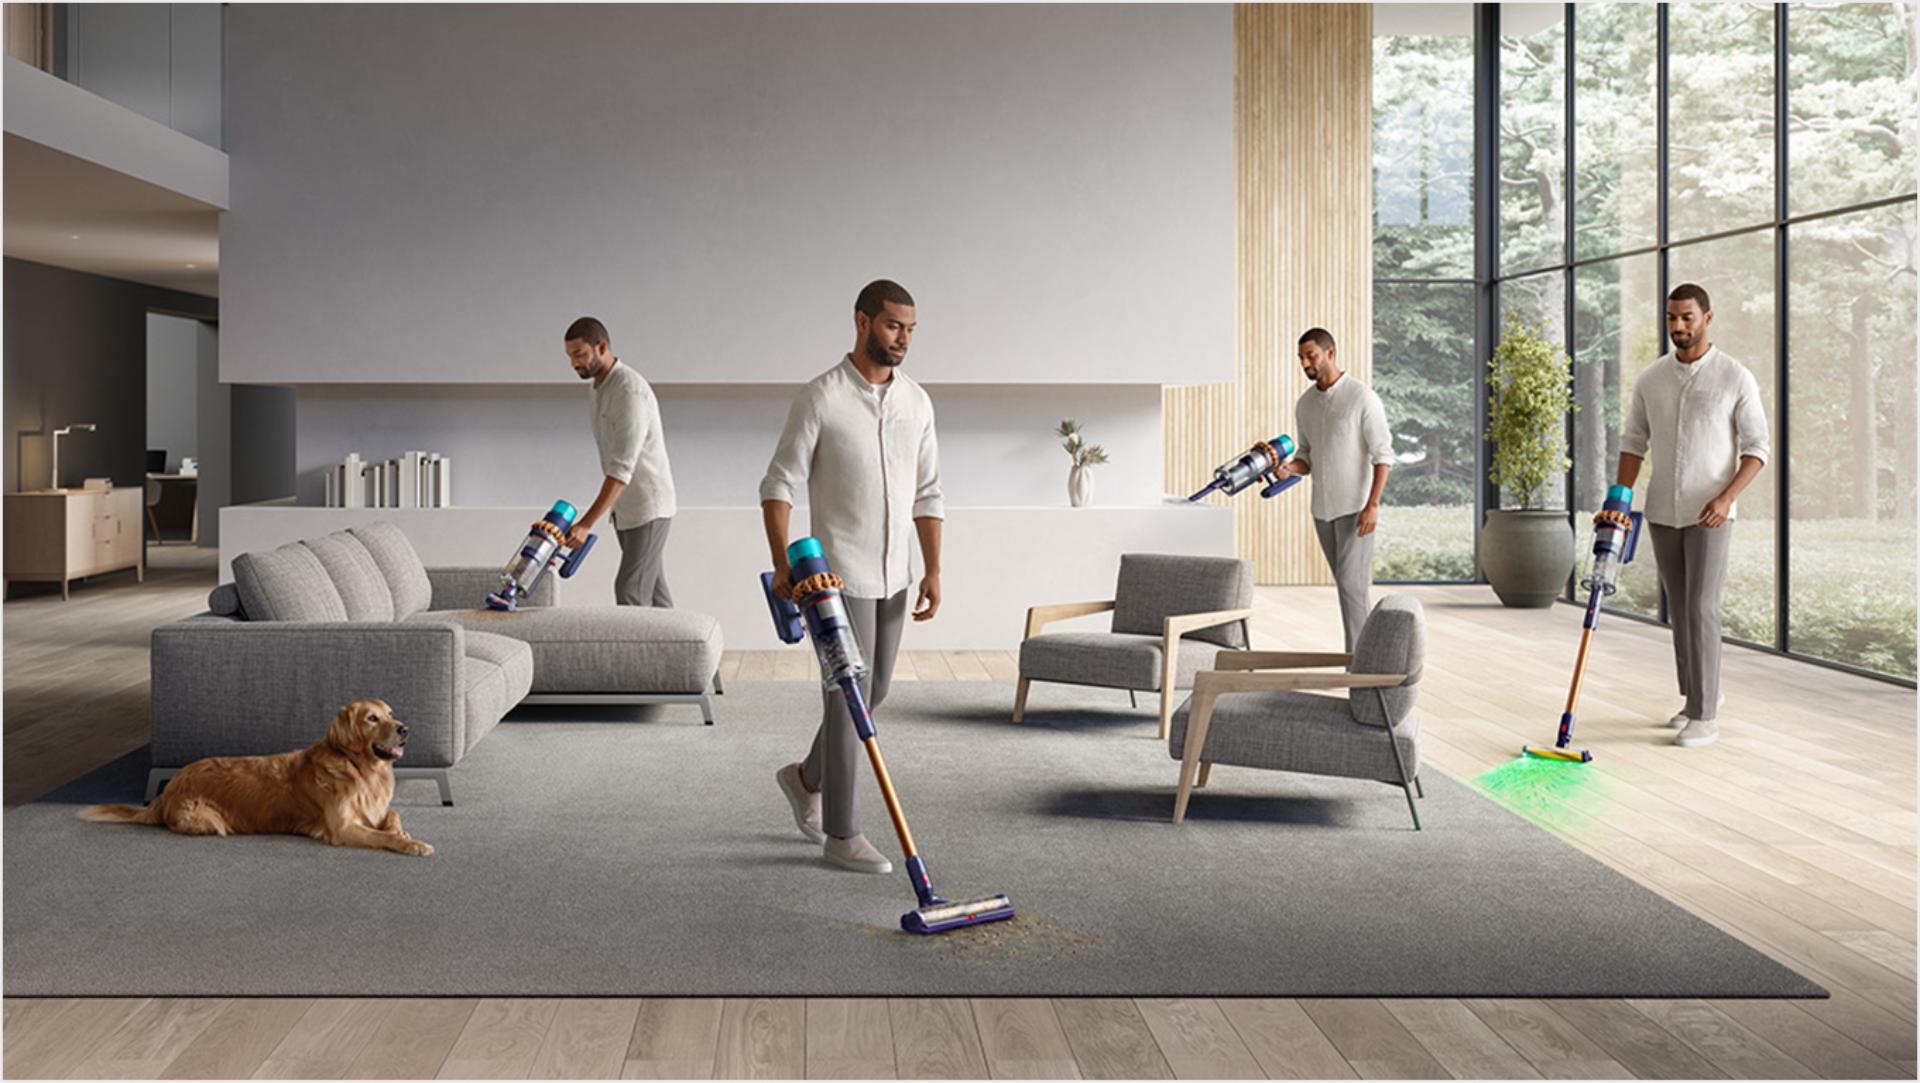 Man cleaning all around the room, on sofa, carpet and hard floor.